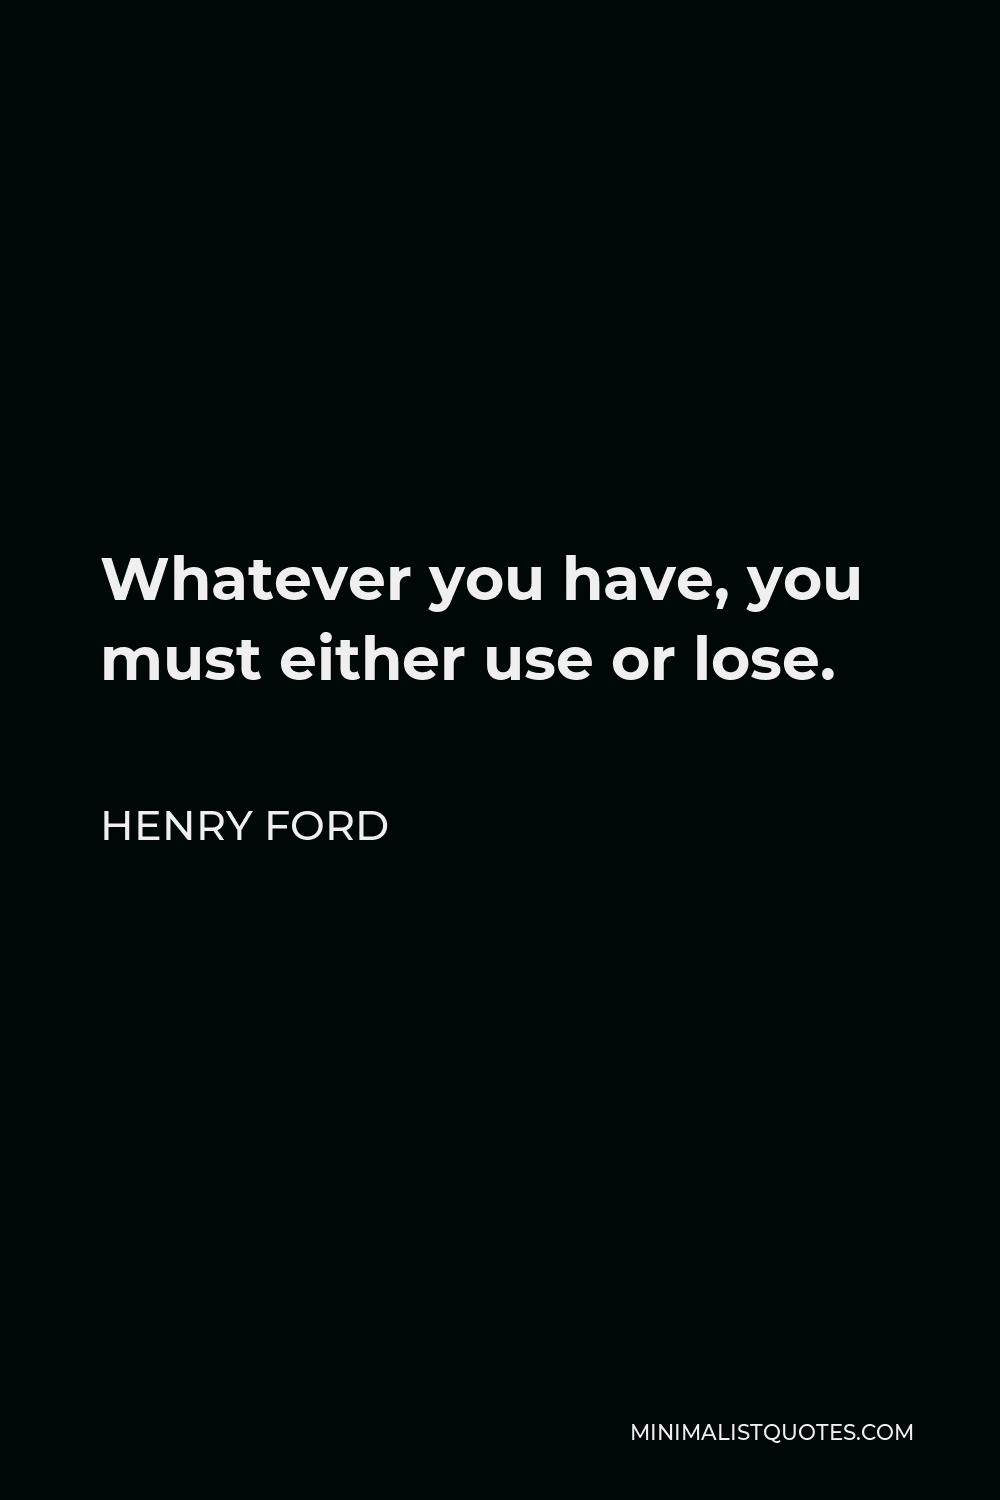 100+ Henry Ford Quotes | Minimalism Quotes